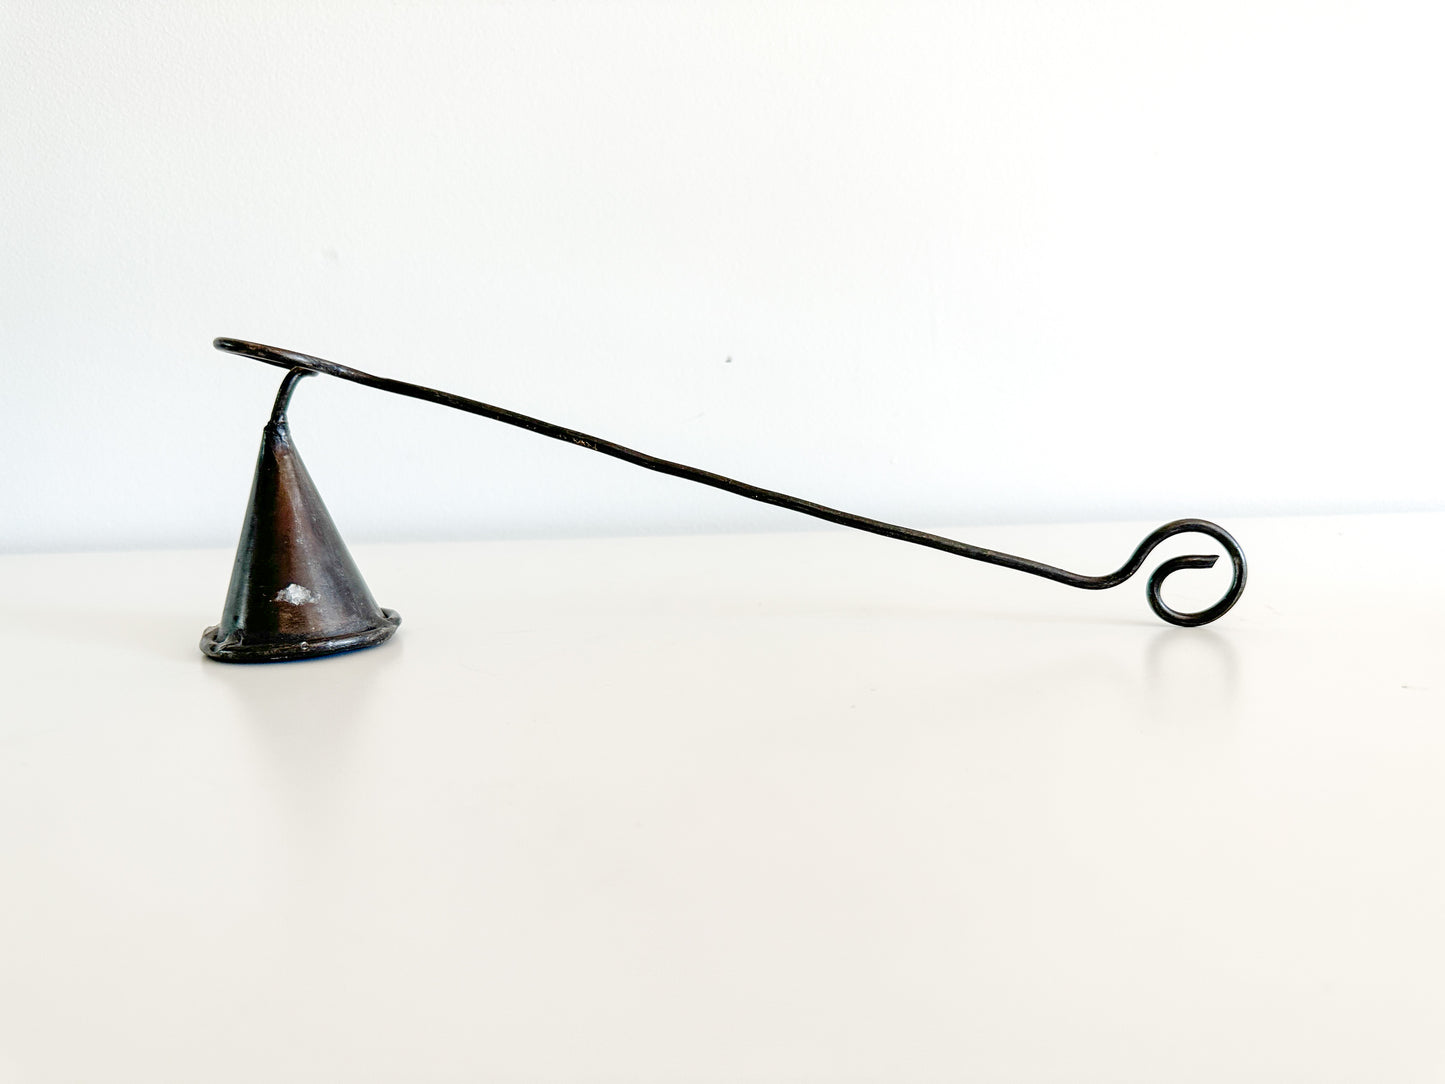 Vintage 1980s Candle metal snuffer